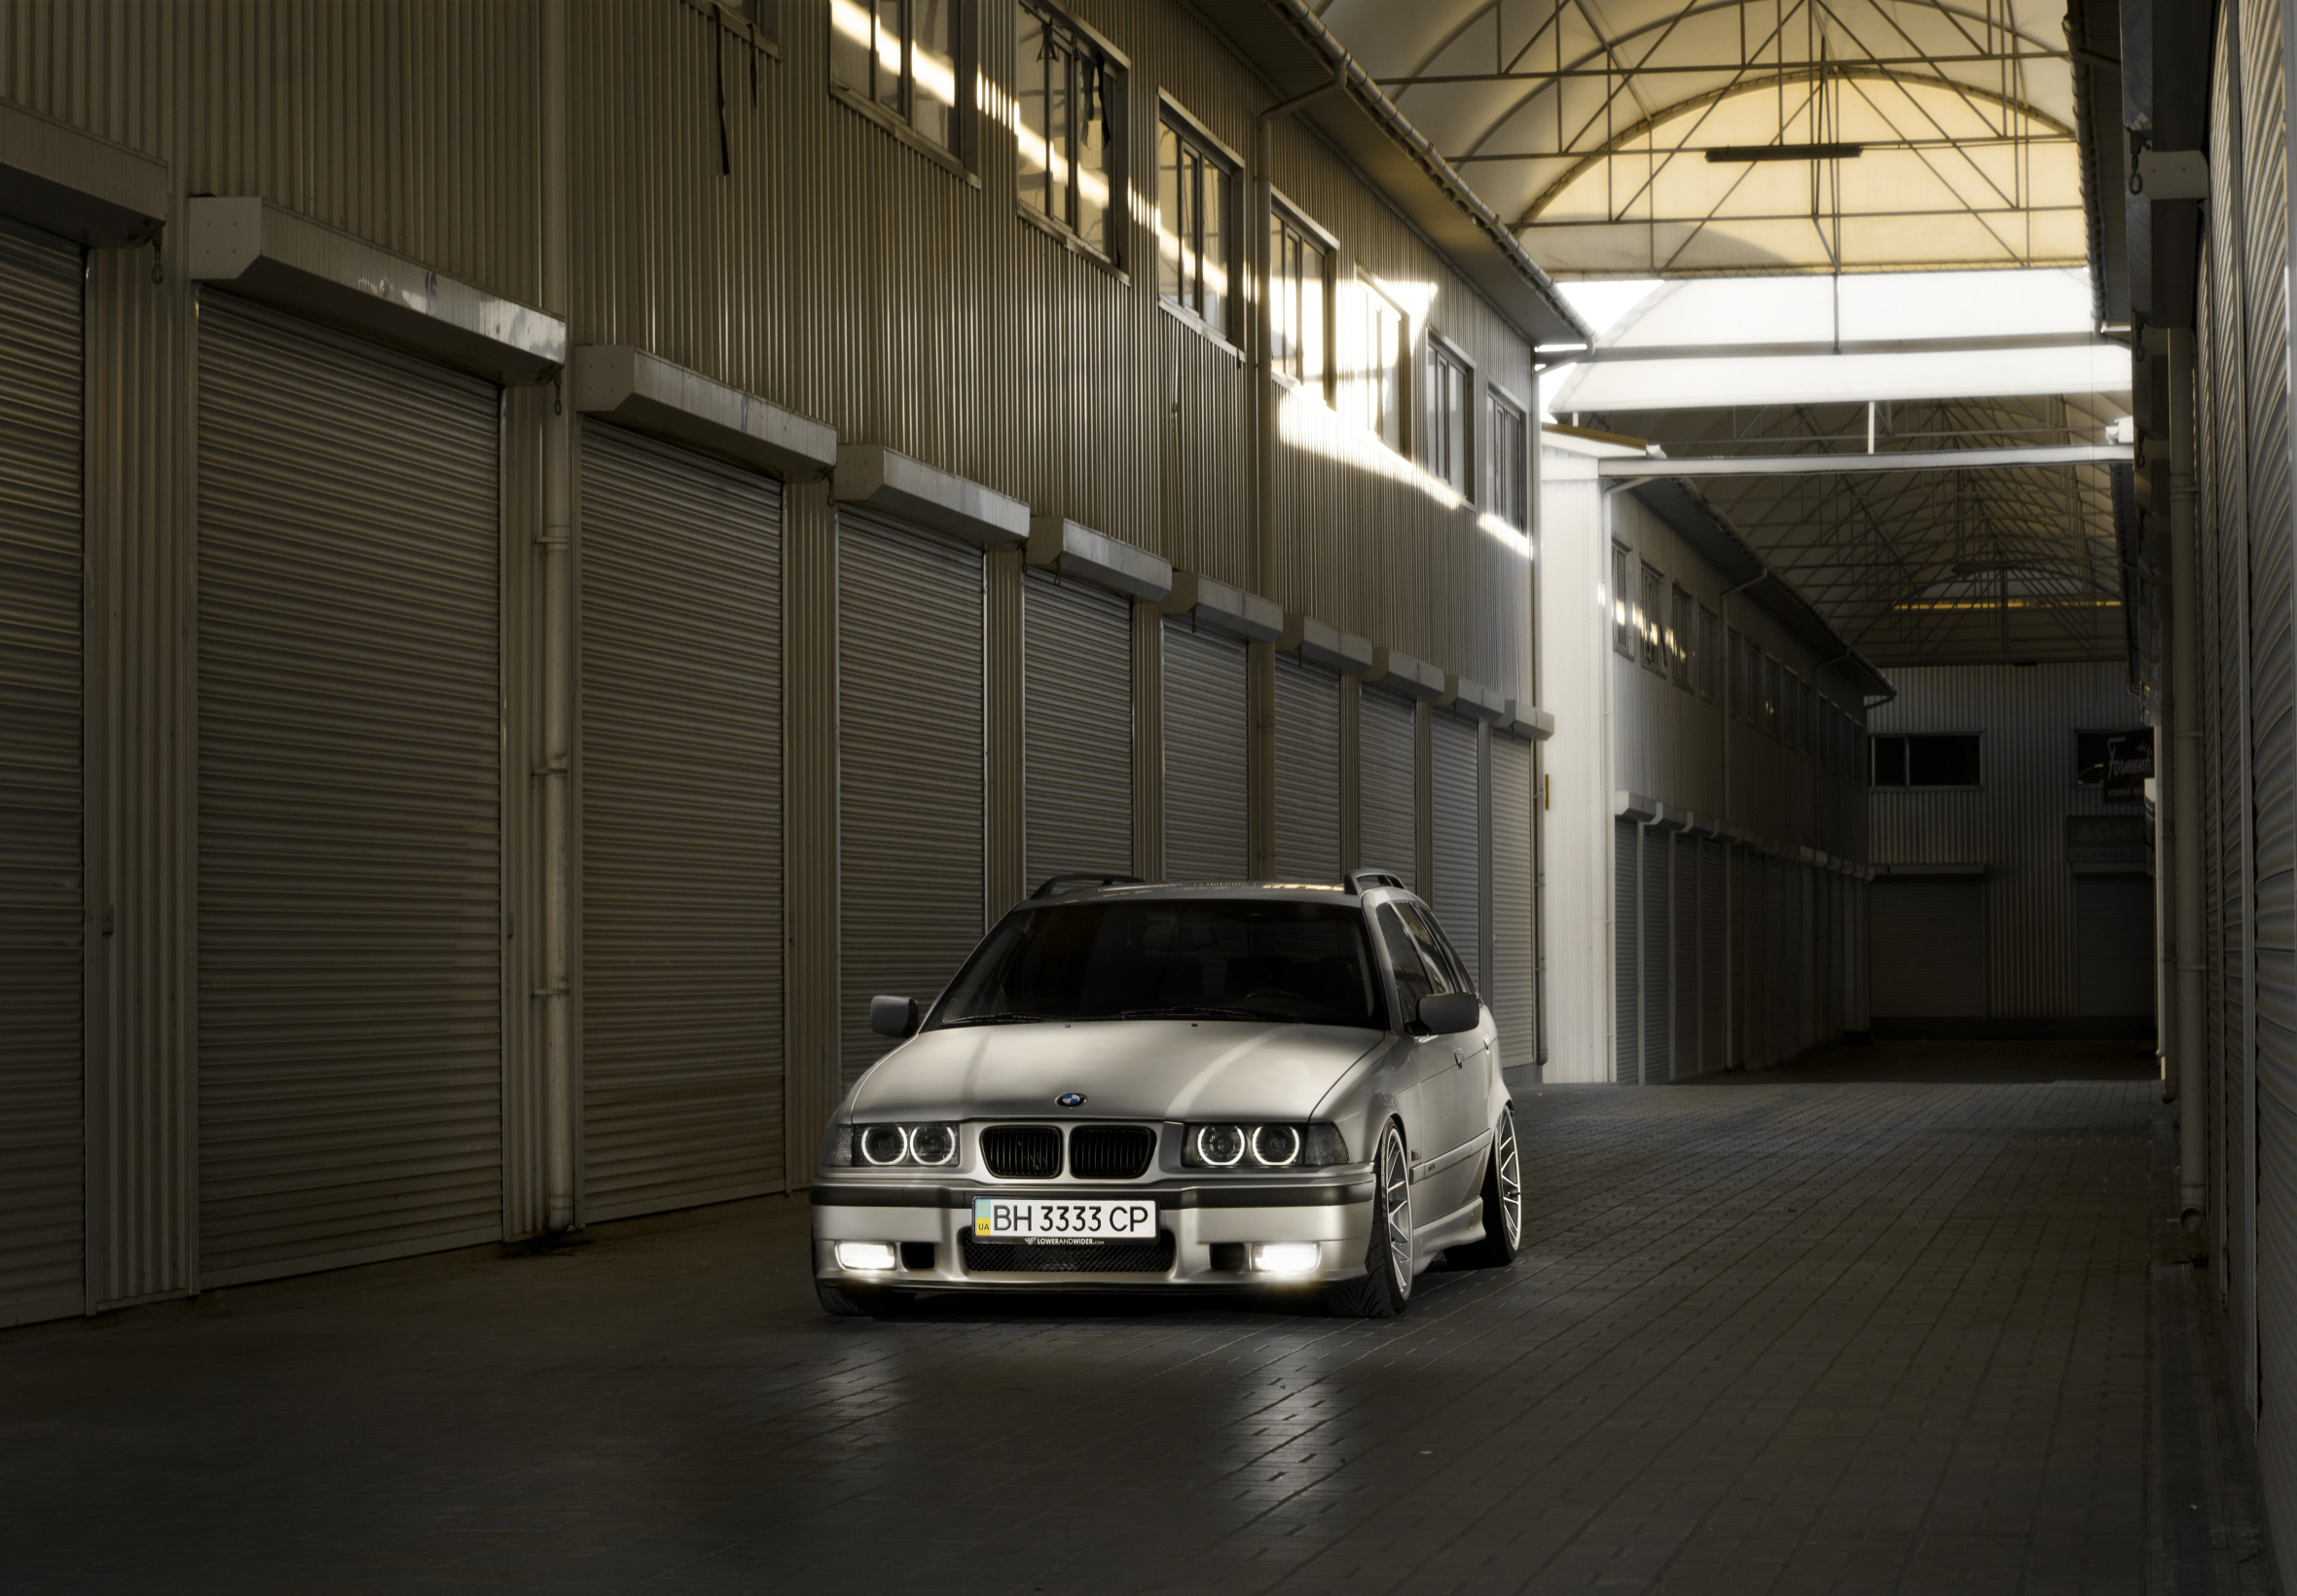 Download wallpaper BMW, 3 series, E36, touring, pavilion, section bmw in  resolution 2360x1640